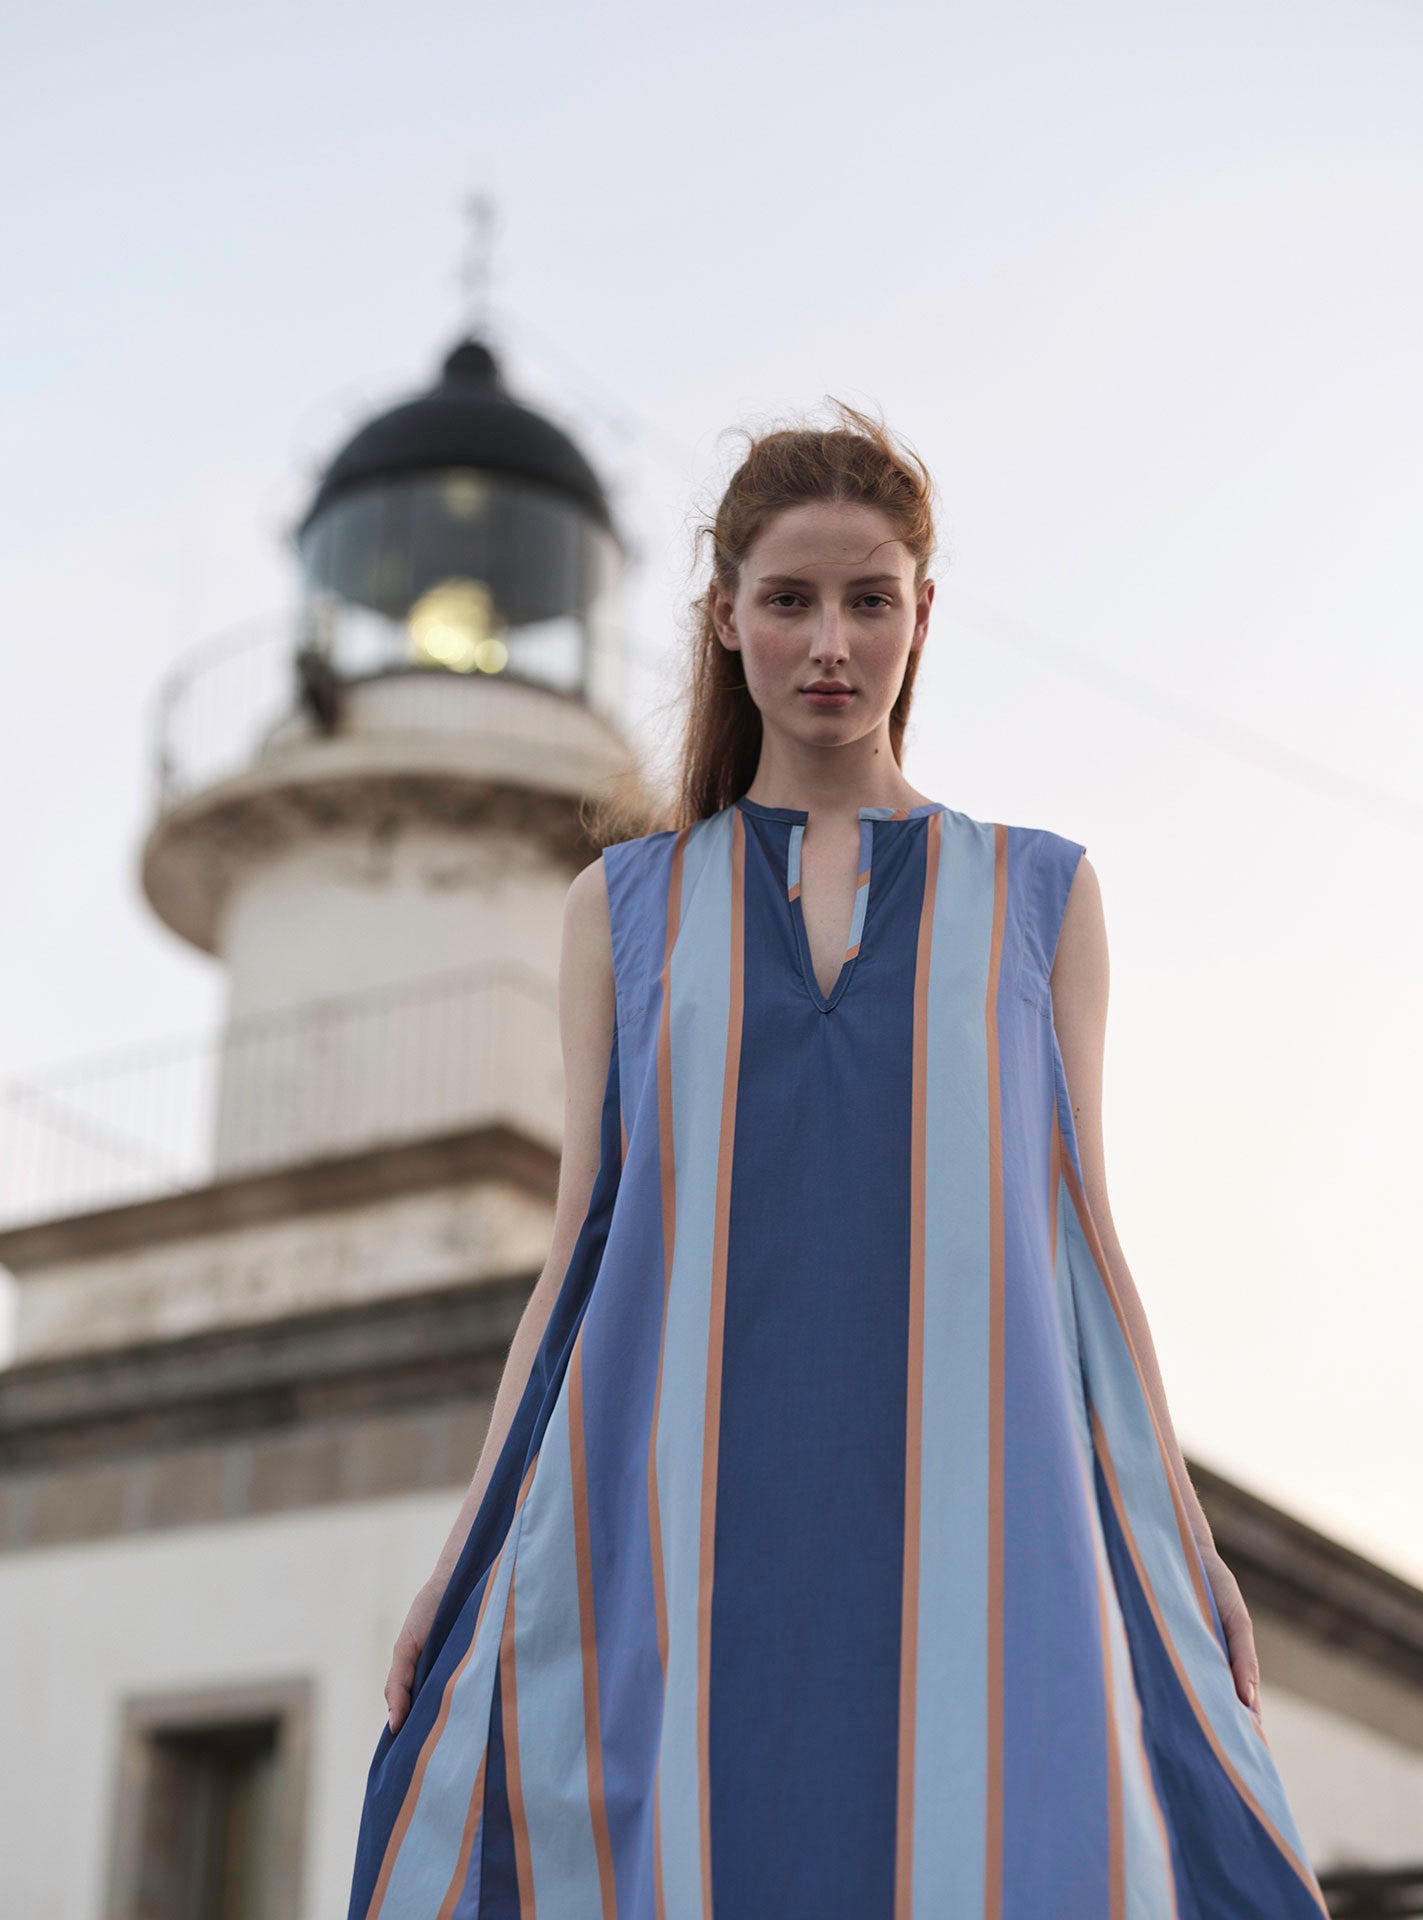 The model Alice is wearing an Apollonia kaftan designed by Thierry Colson and photographed by Stéphane Gautronneau.